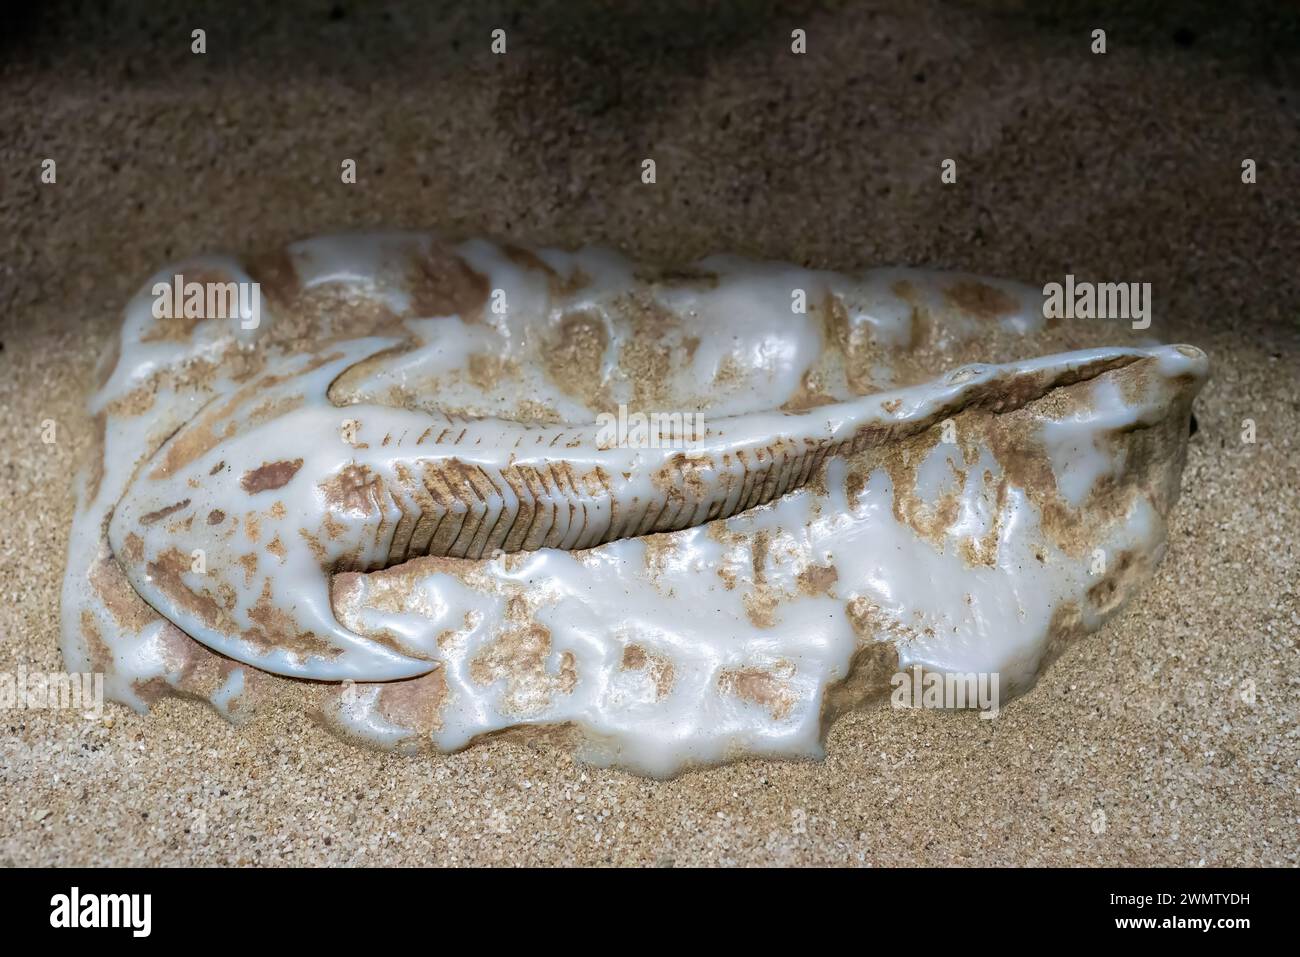 Ancient fossil of jawless fish Cephalaspis in sand Stock Photo